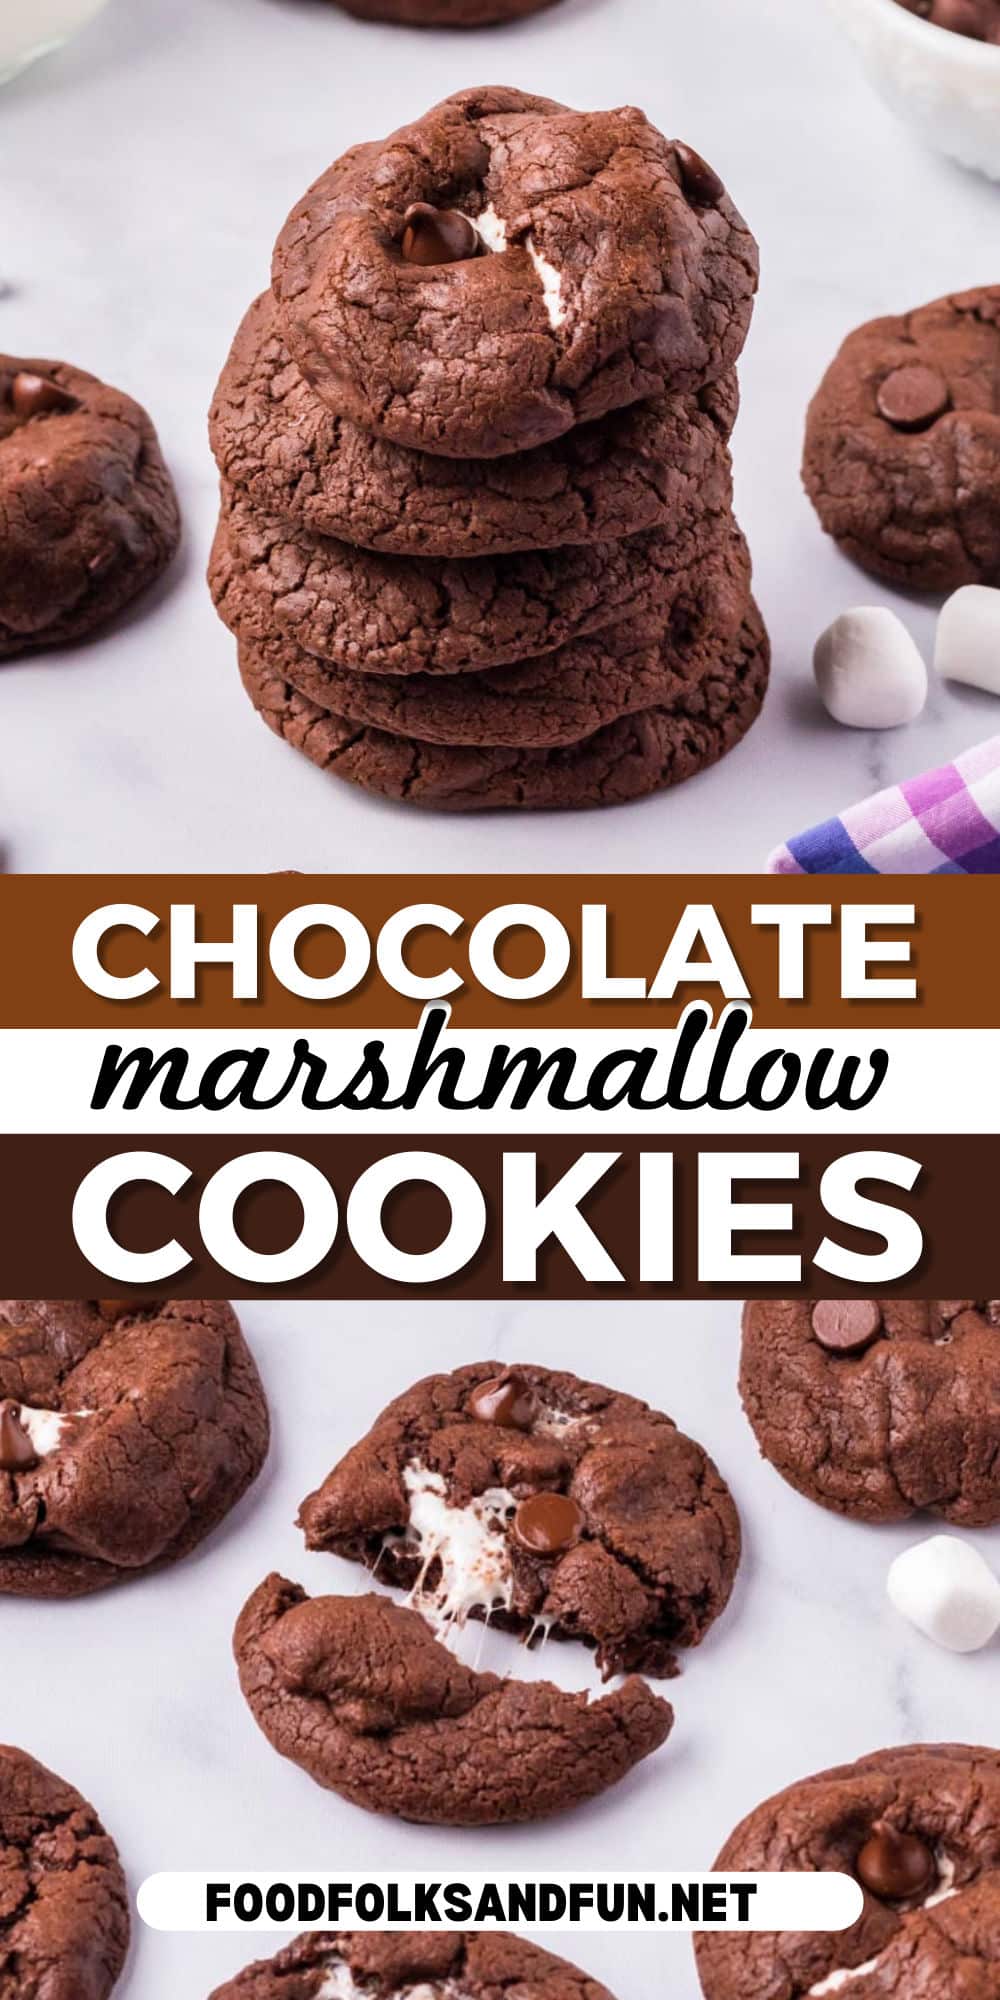 These Chocolate Marshmallow Cookies are chewy and fudge-like on the outside and filled with gooey marshmallows on the inside. via @foodfolksandfun